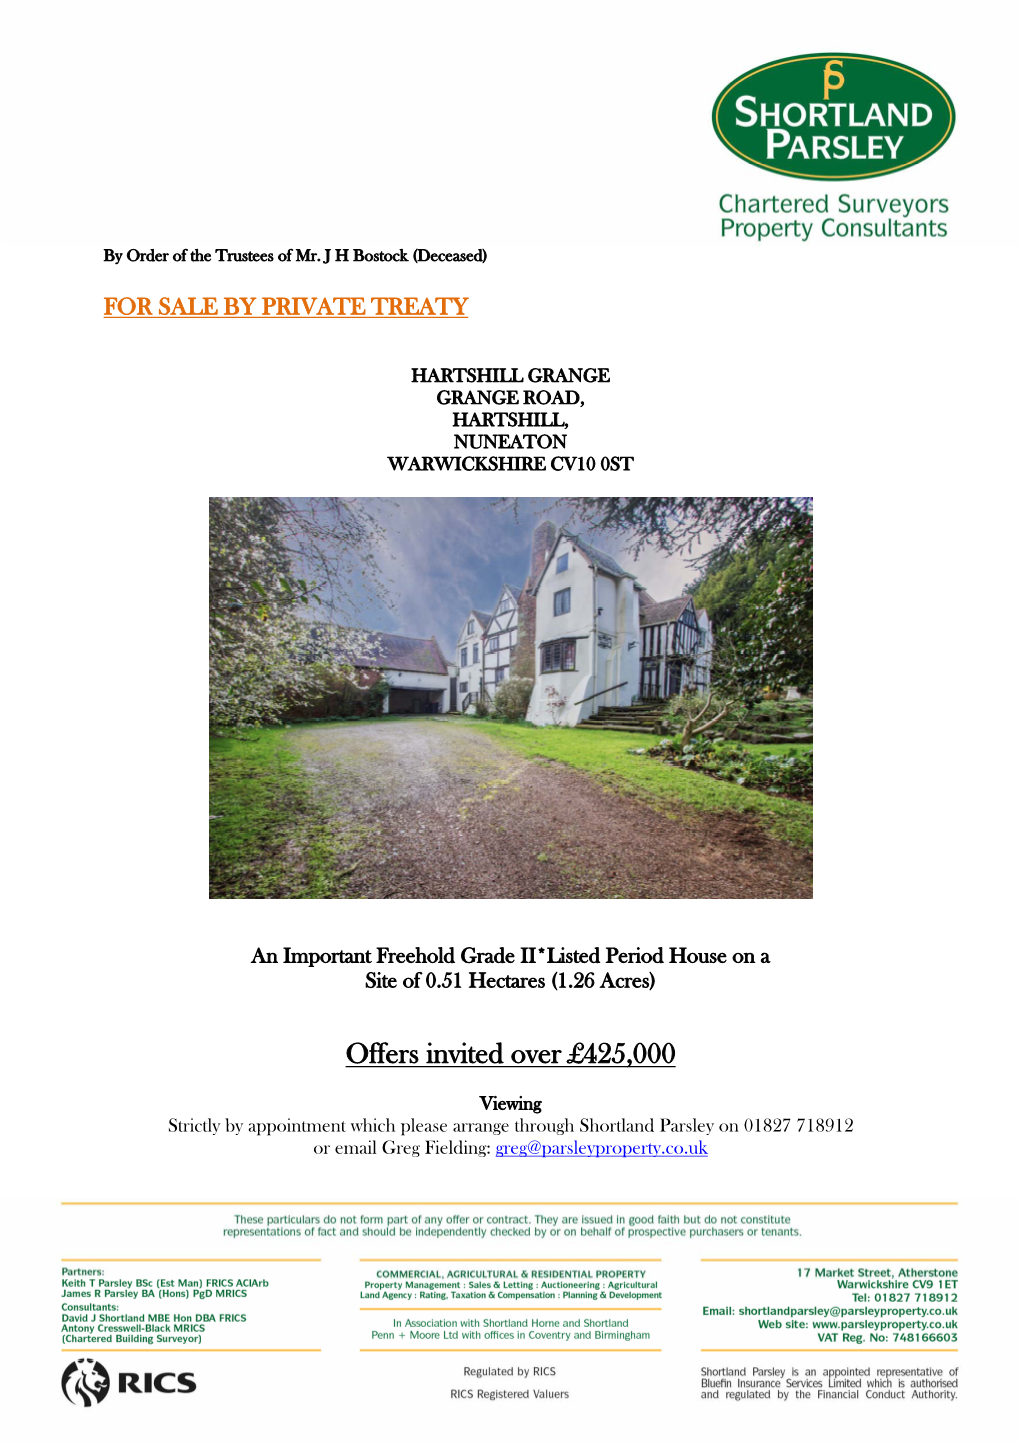 Offers Invited Over £425,000